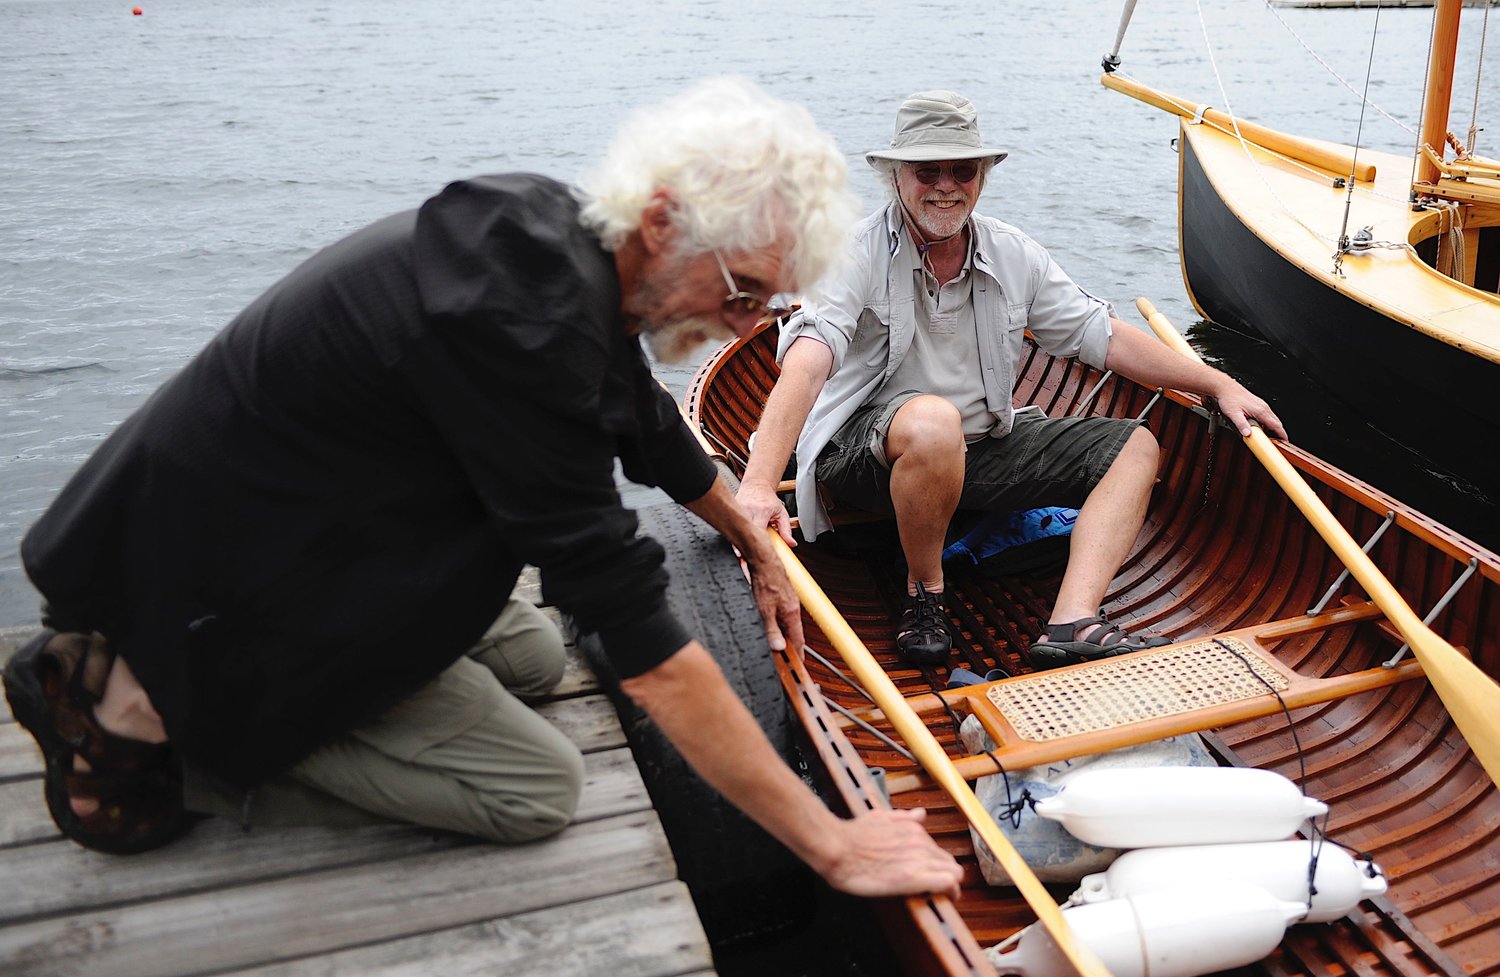 Founder’s afternoon at the dock. Zeke Boyle lends a hand to co-founder Joe Freda as the latter disembarks from the 1938 Penn Yan rowboat.